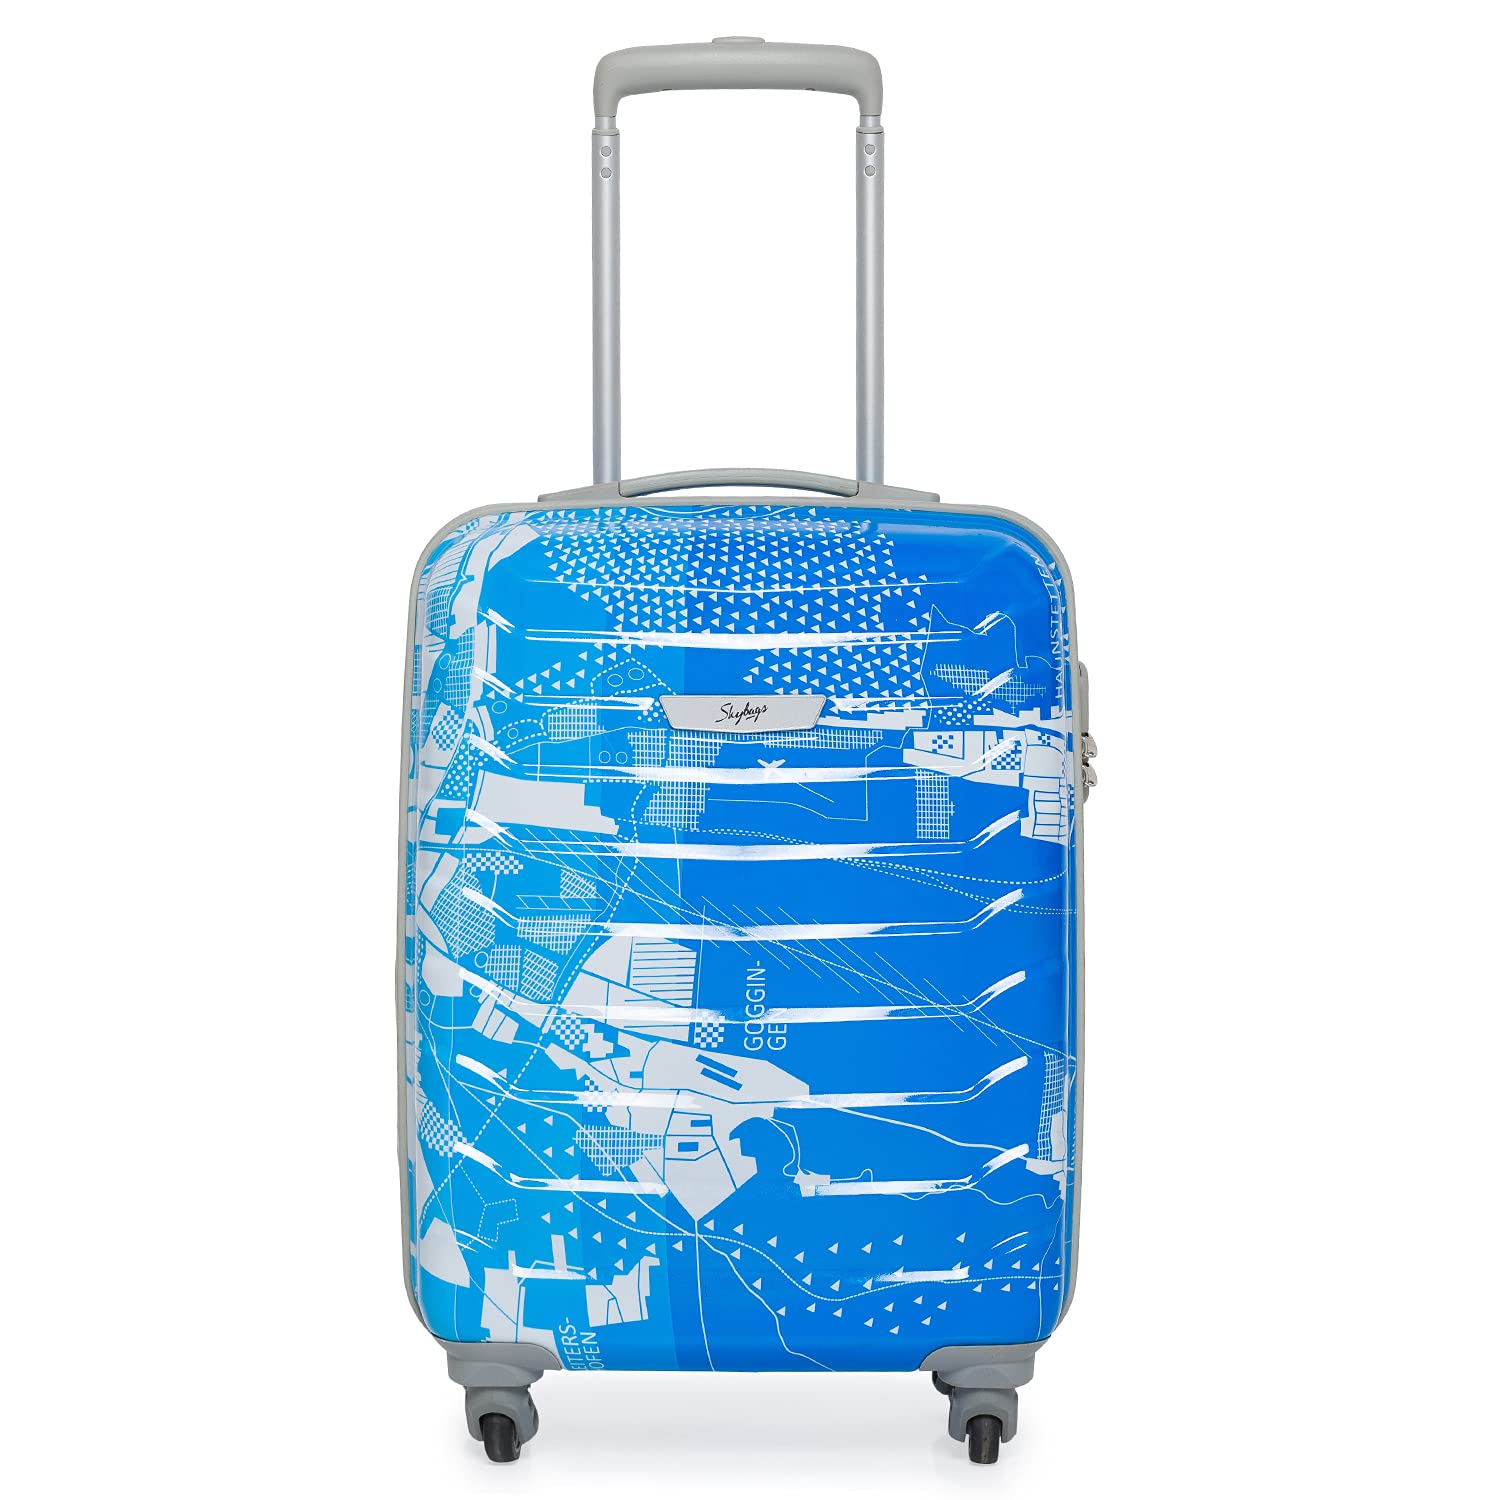 Buy Skybags Trooper 55 Cms Polycarbonate Blue Hardsided Cabin Luggage + 10% Off With HDFC Cards